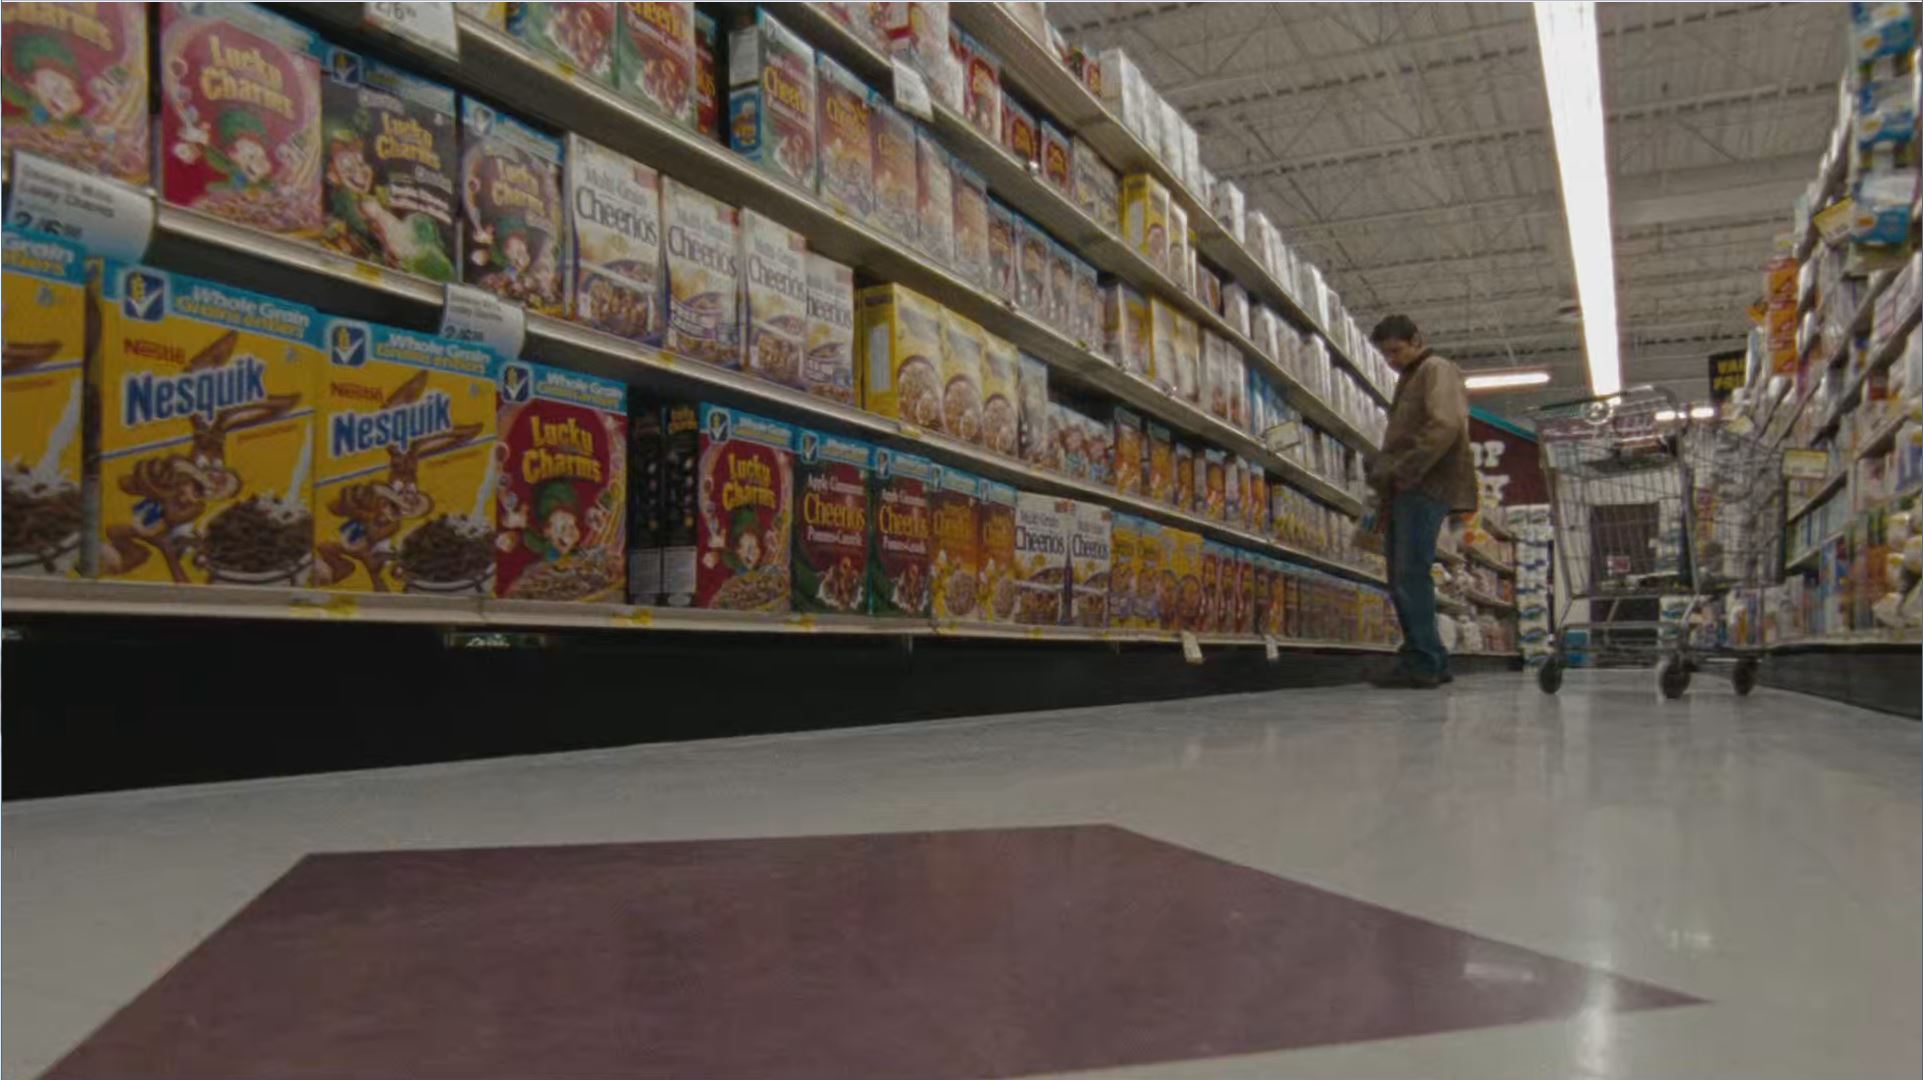 Qt3 Movie Podcast: 3x3: grocery store scenes - #20 by Kelly_Wand - Movies -  Quarter To Three Forums